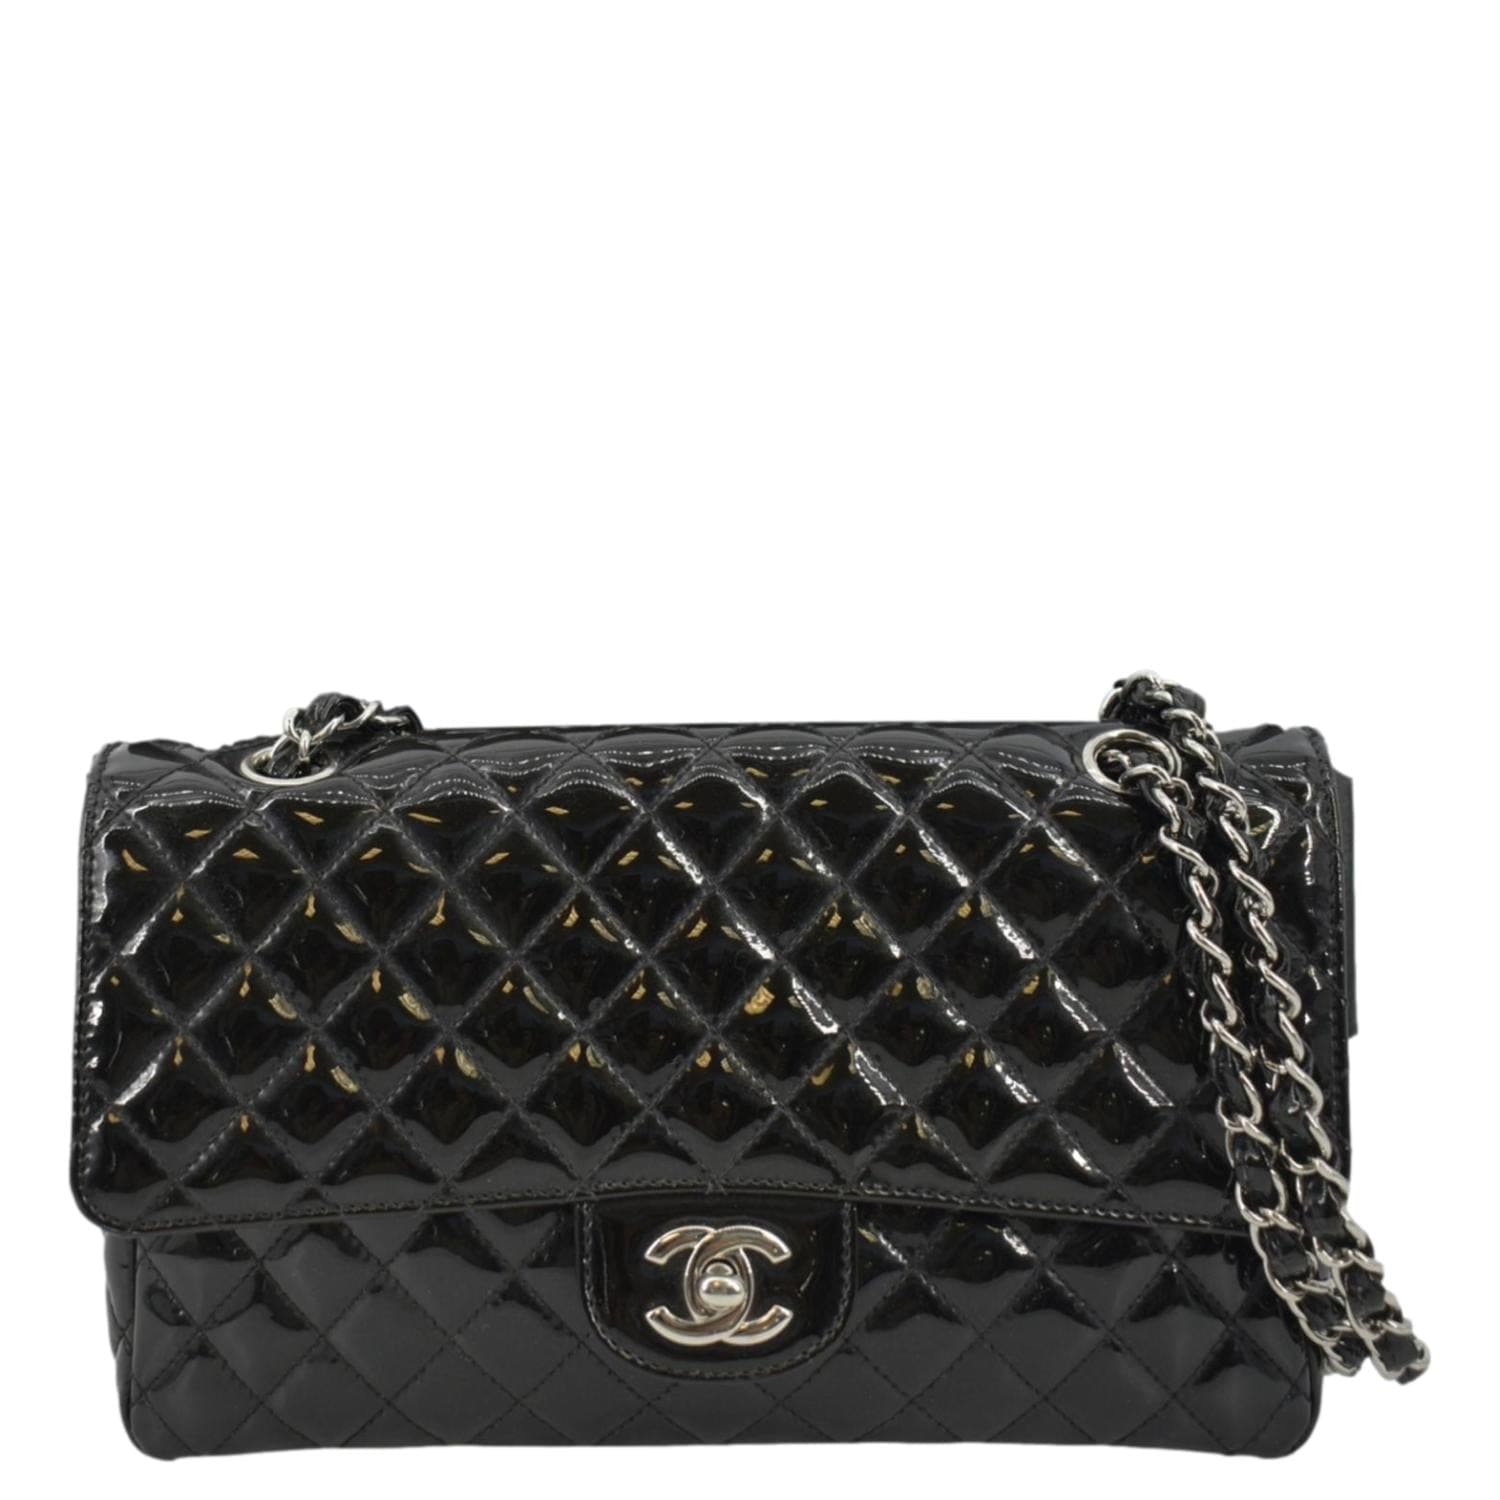 Timeless/Classique patent leather crossbody bag